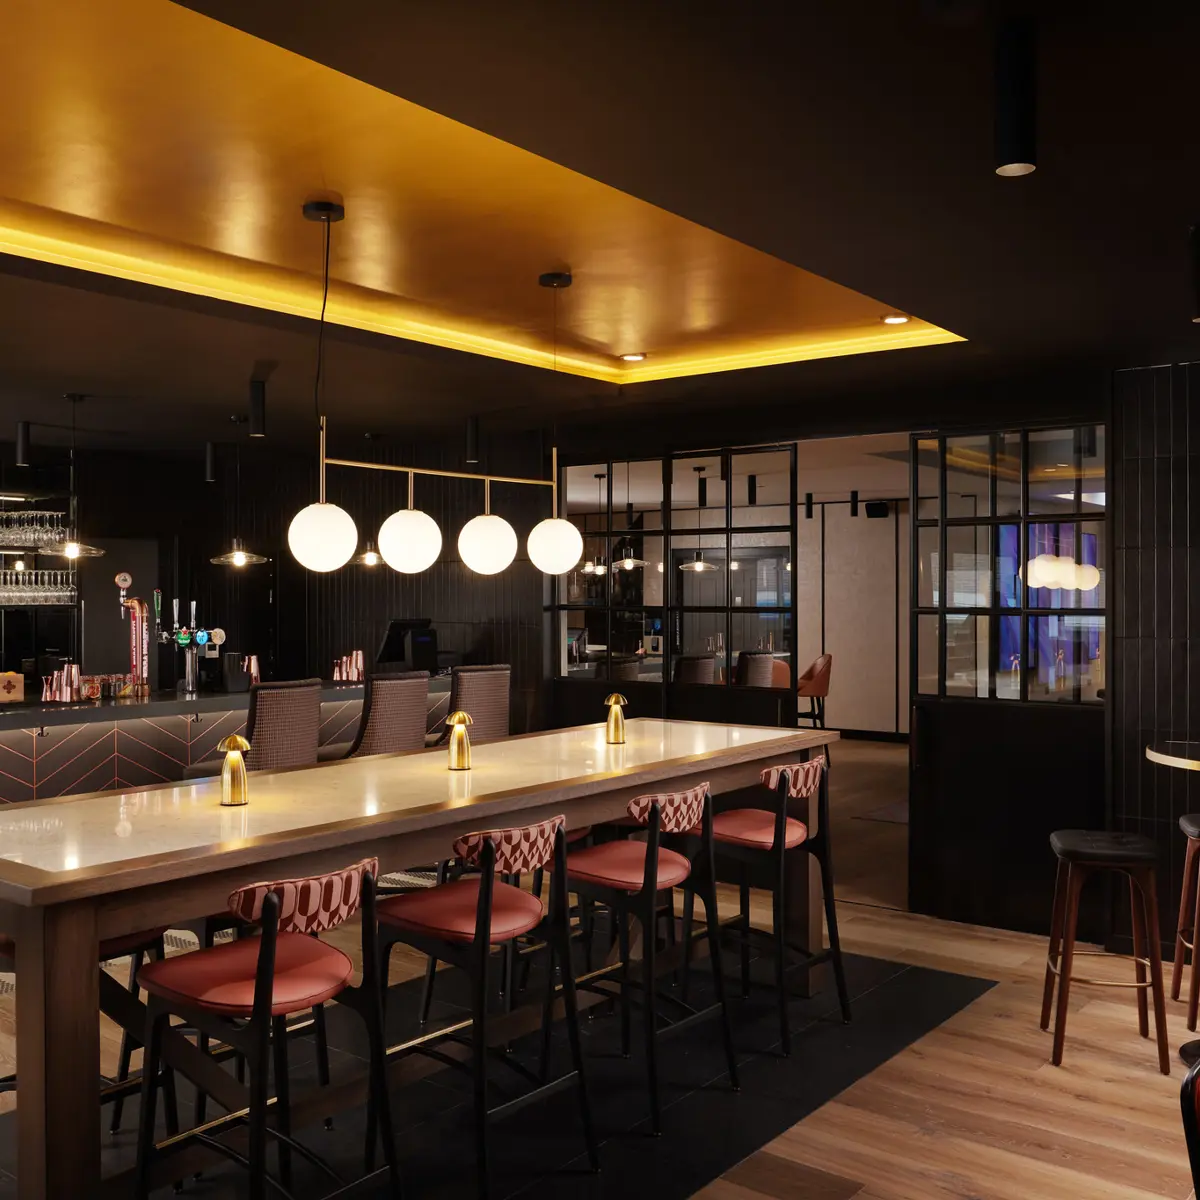 A spacious bar with numerous stools and tables.